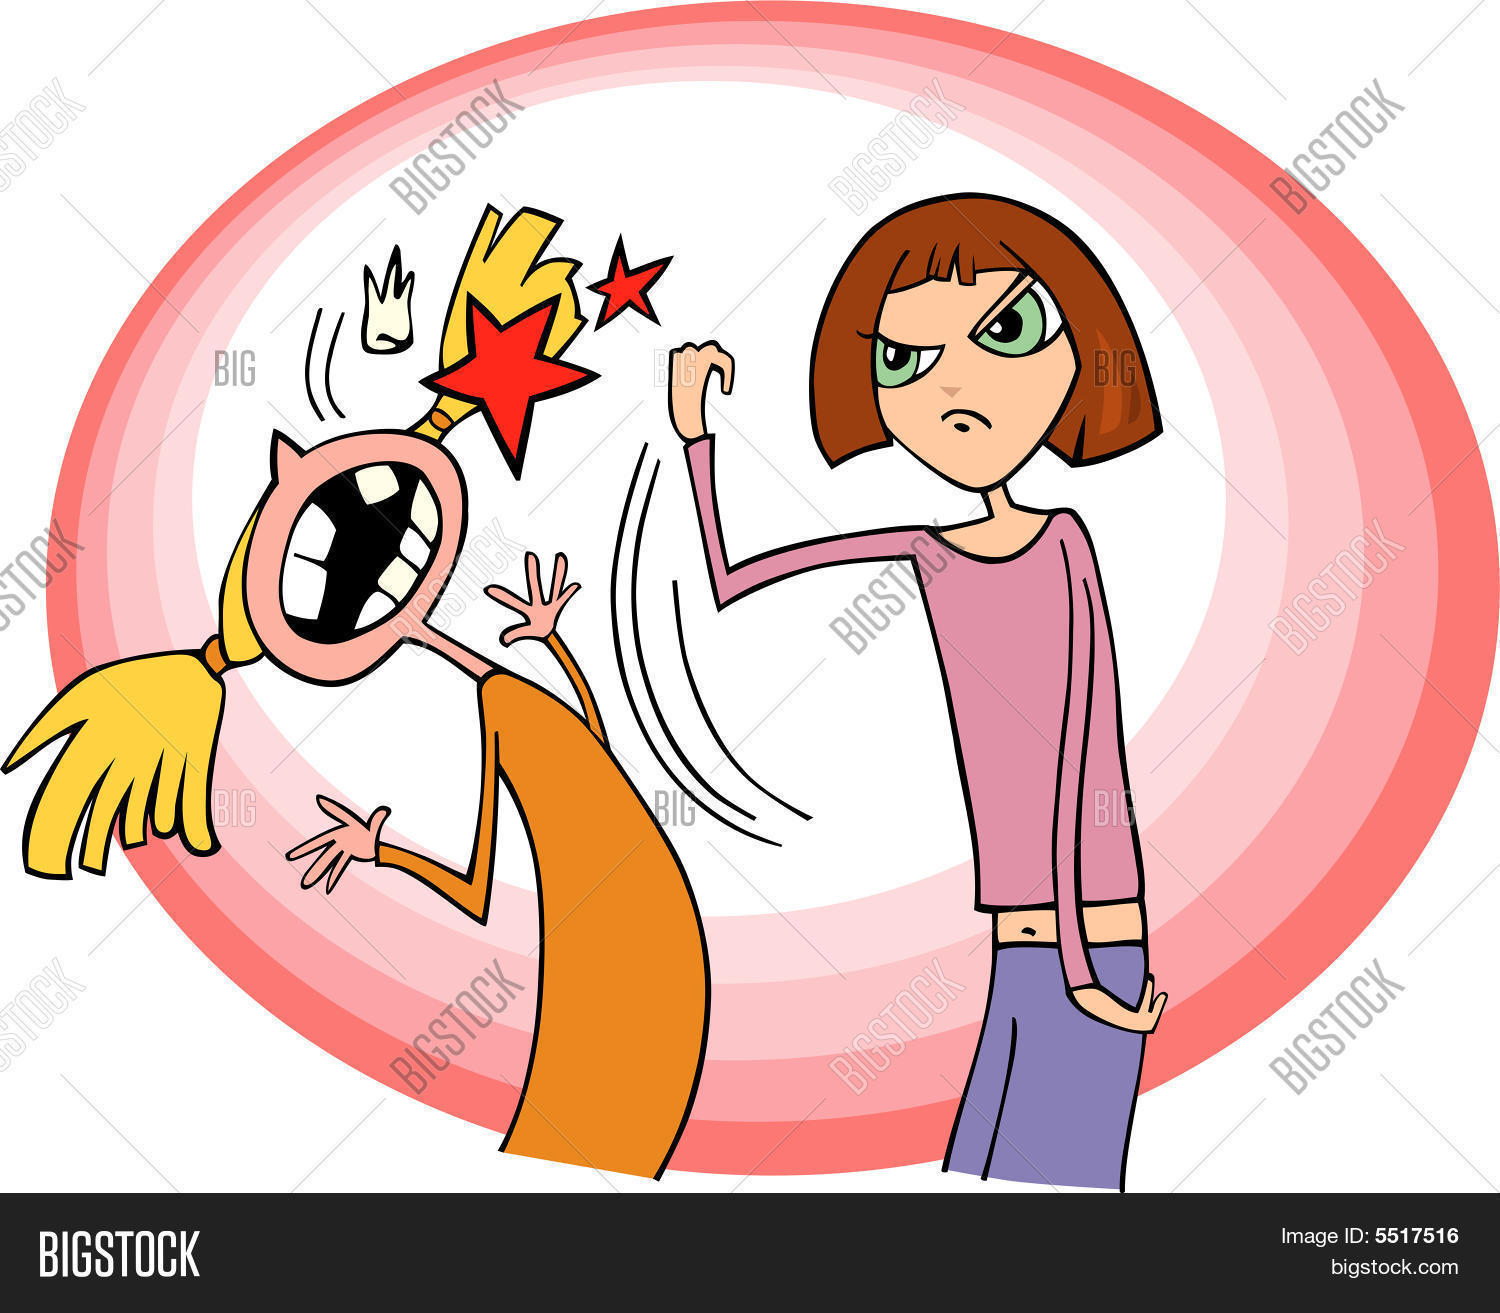 boy and girl fighting clipart - photo #10